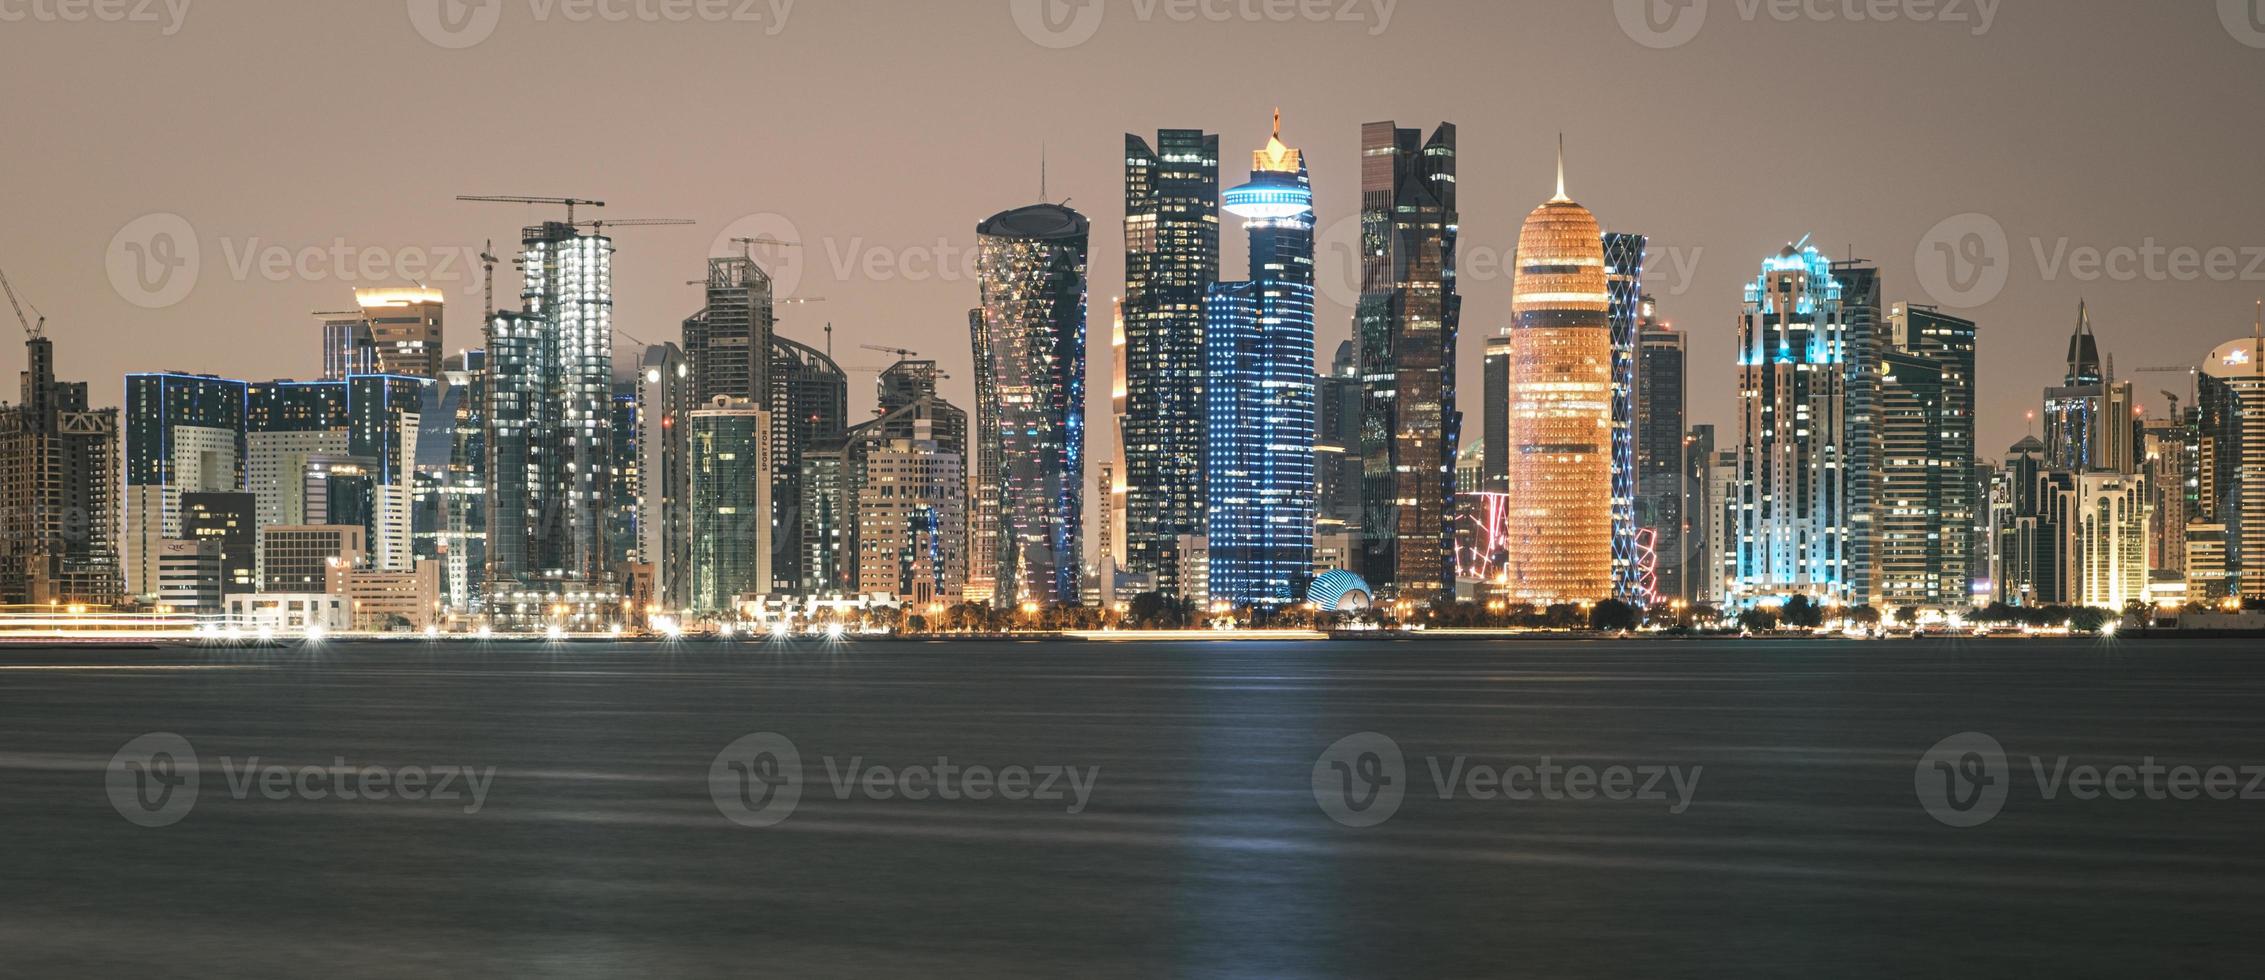 Doha Qatar skyline at night showing skyscrapers lights reflected in the Arabic gulf photo